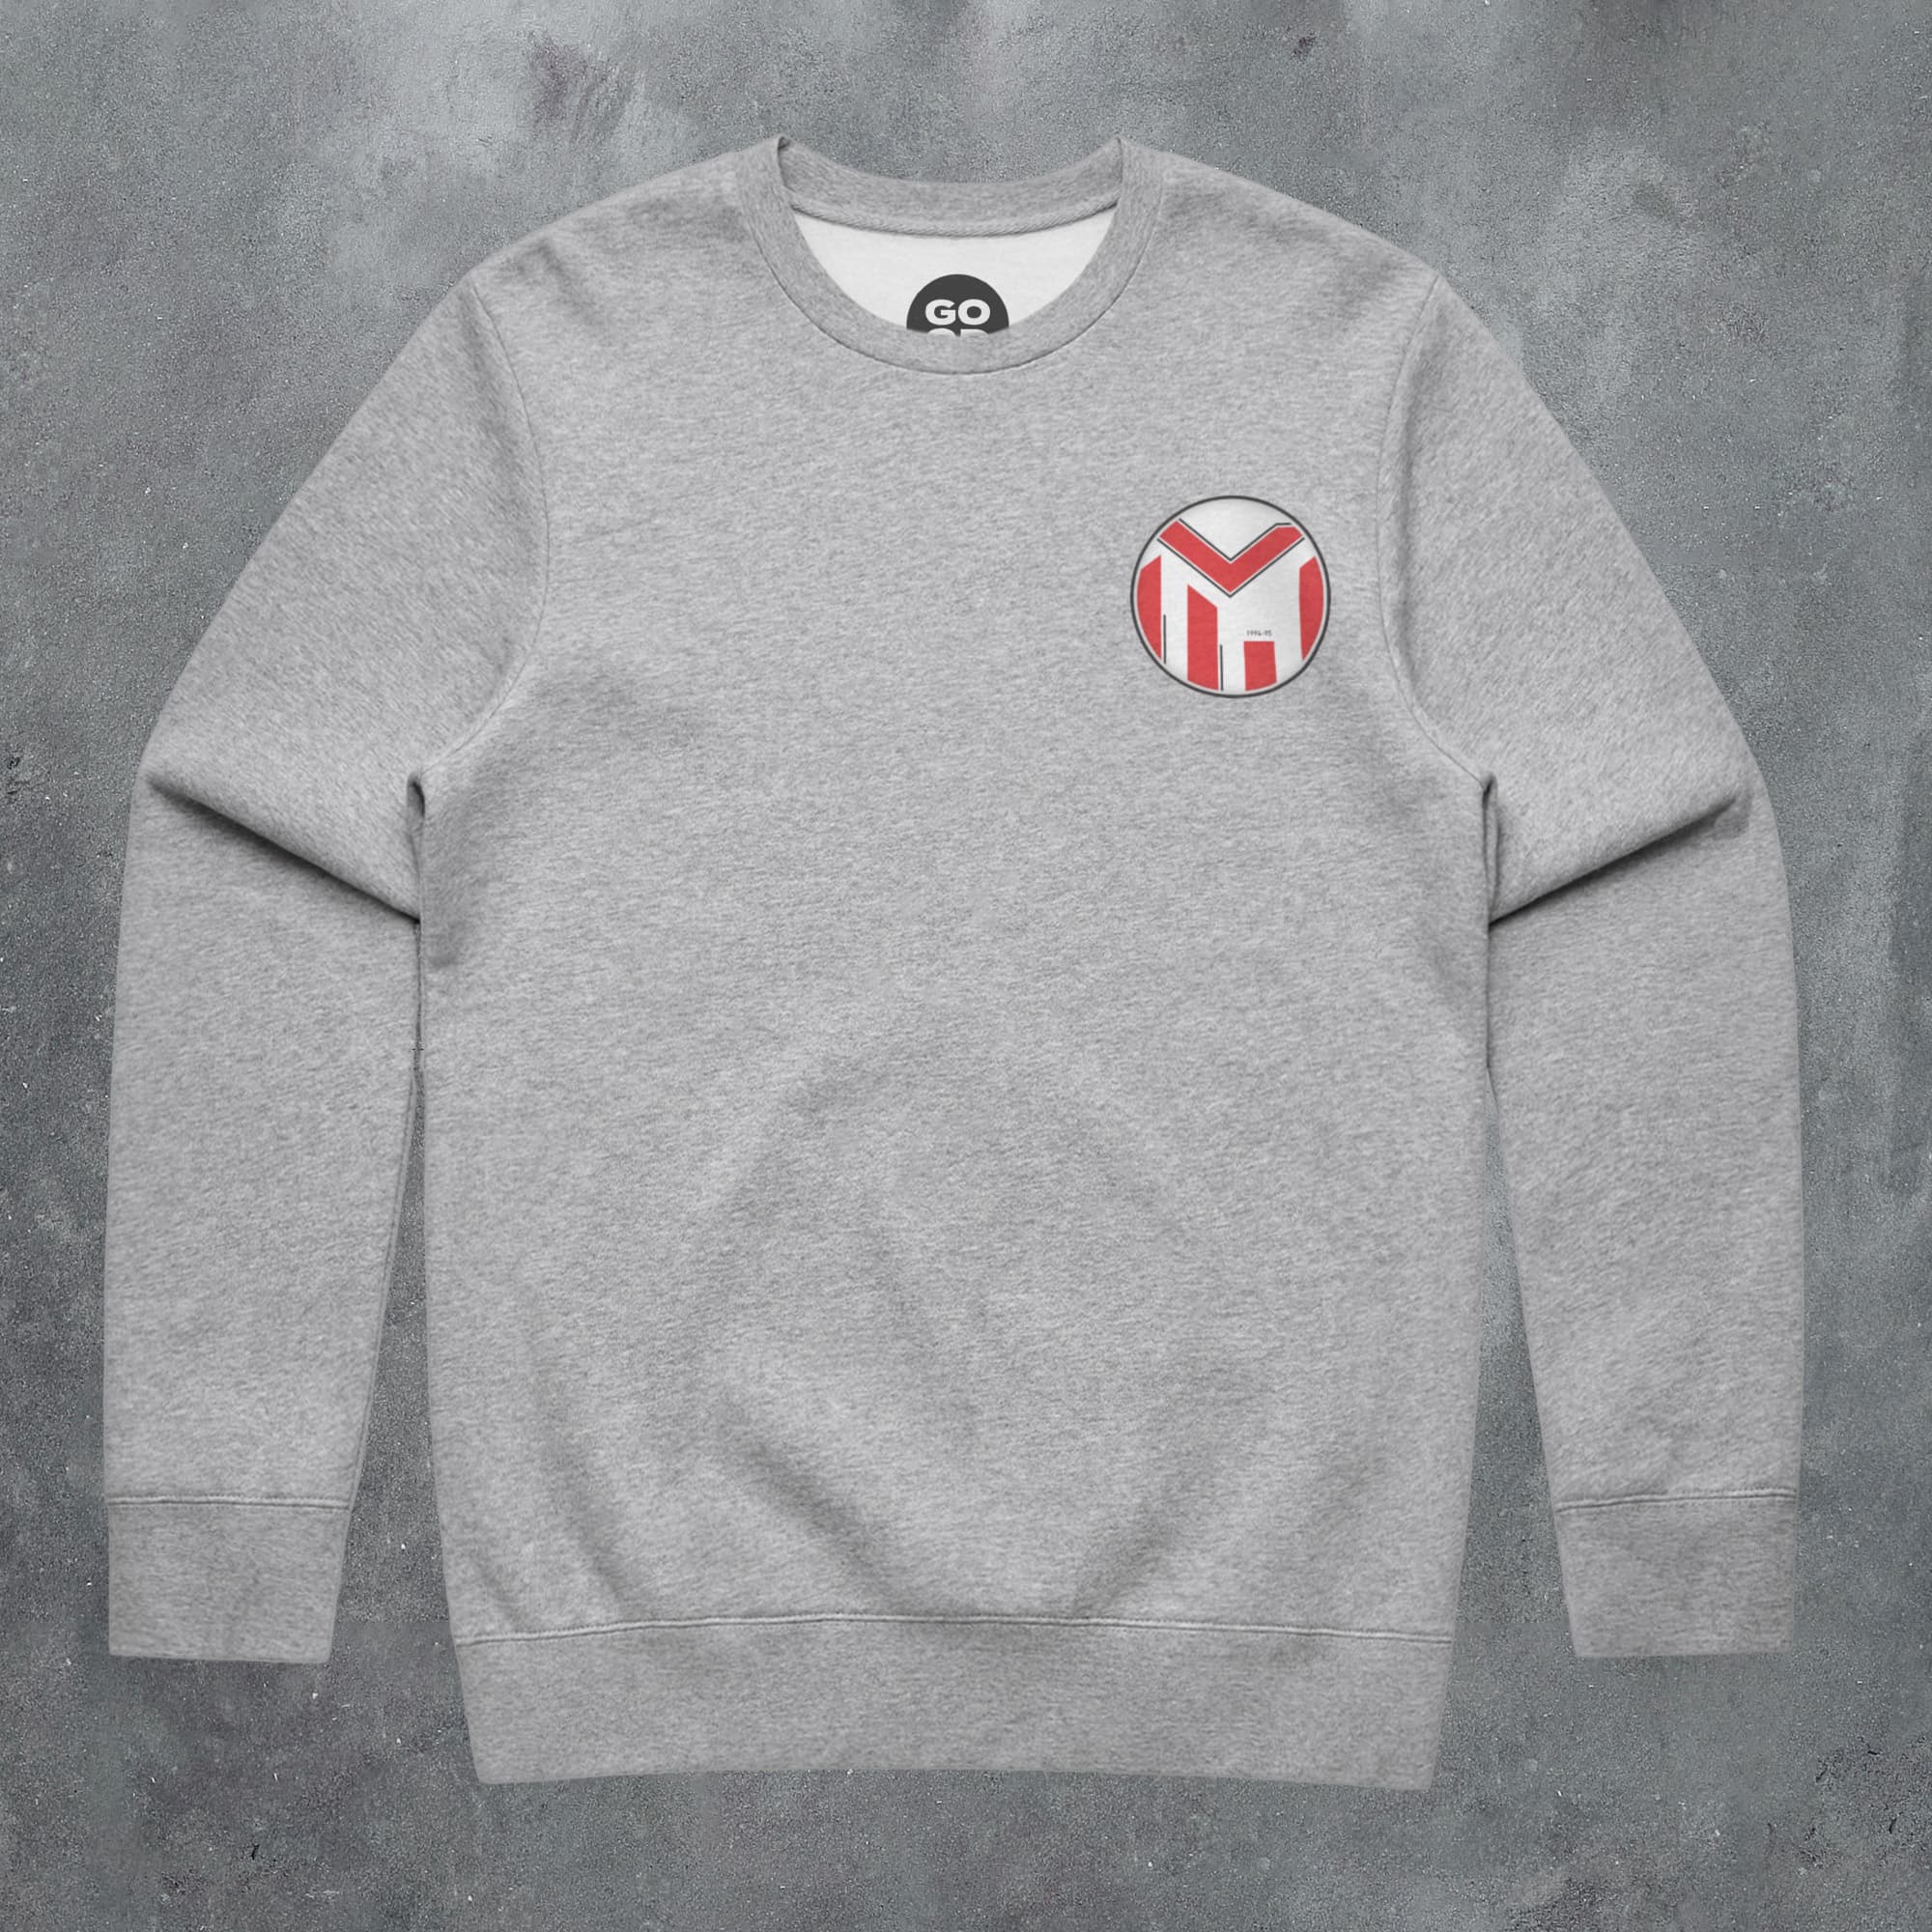 a grey sweatshirt with a red and white m patch